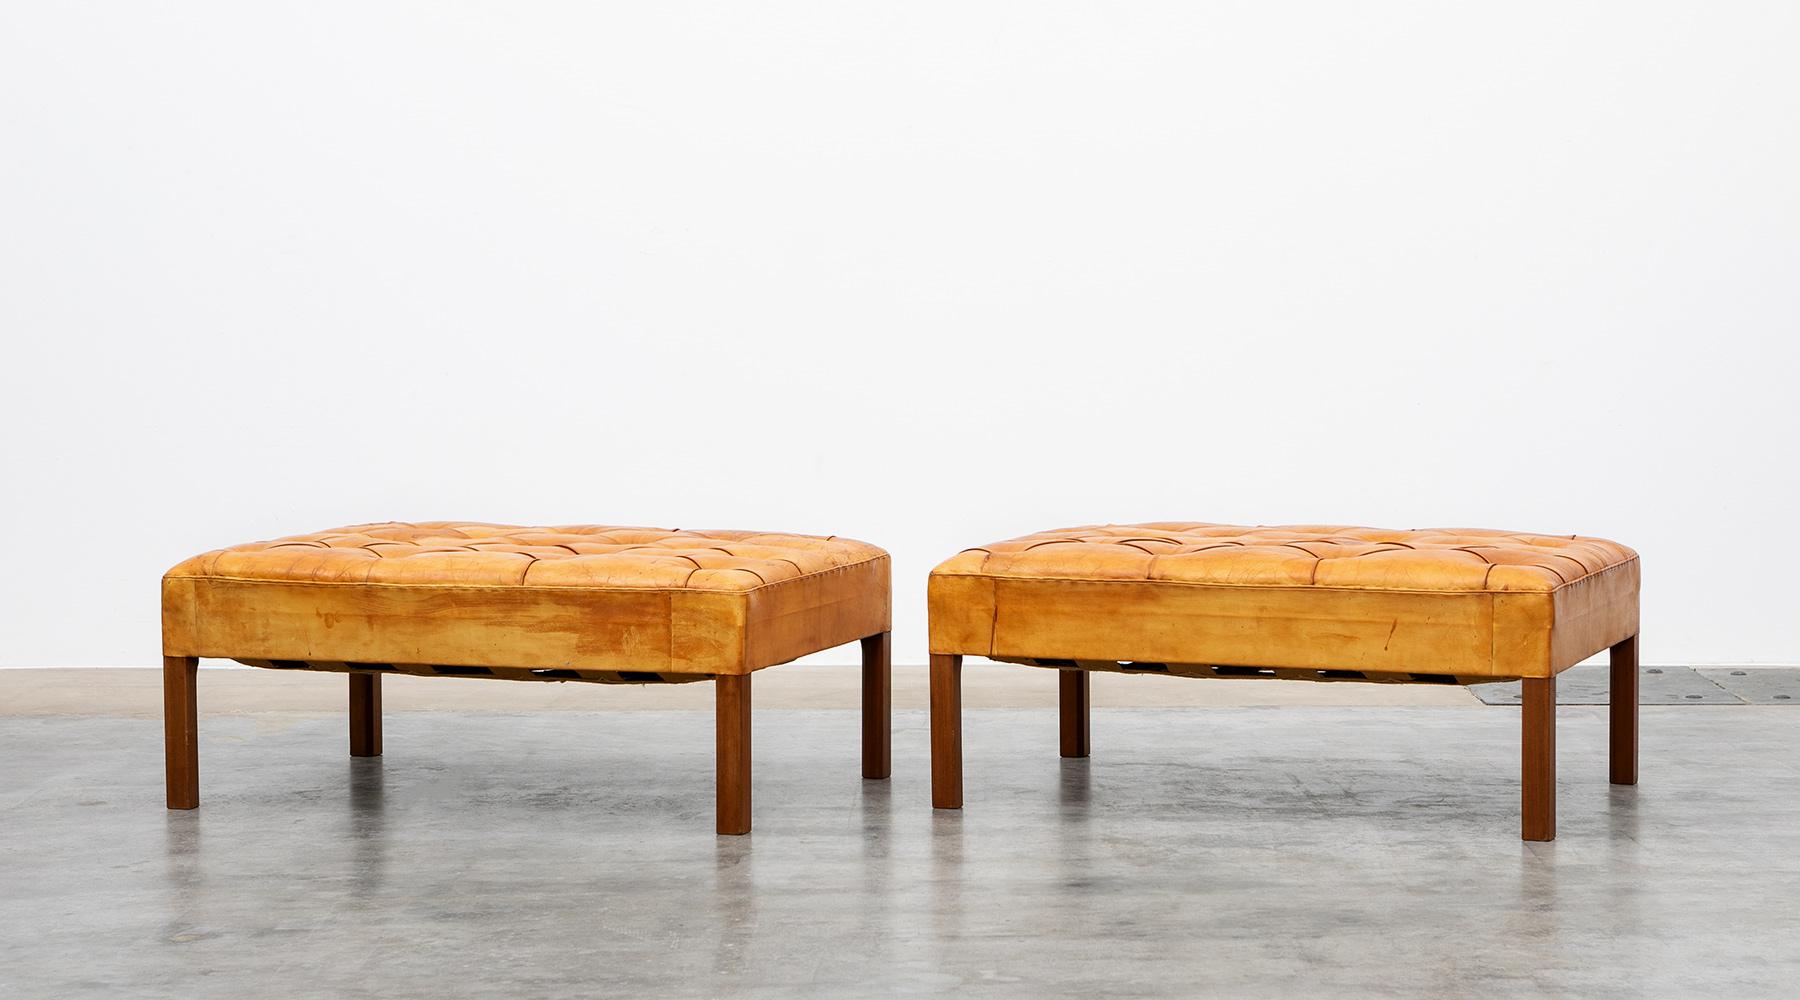 Pair of stools by Kaare Klint for Rud Rasmussen, niger leather, mahogany, Denmark, 1933.

Outstanding pair of stools originally made for the matching freestanding mahogany sofa units. Seats are upholstered in patinated Niger leather and have